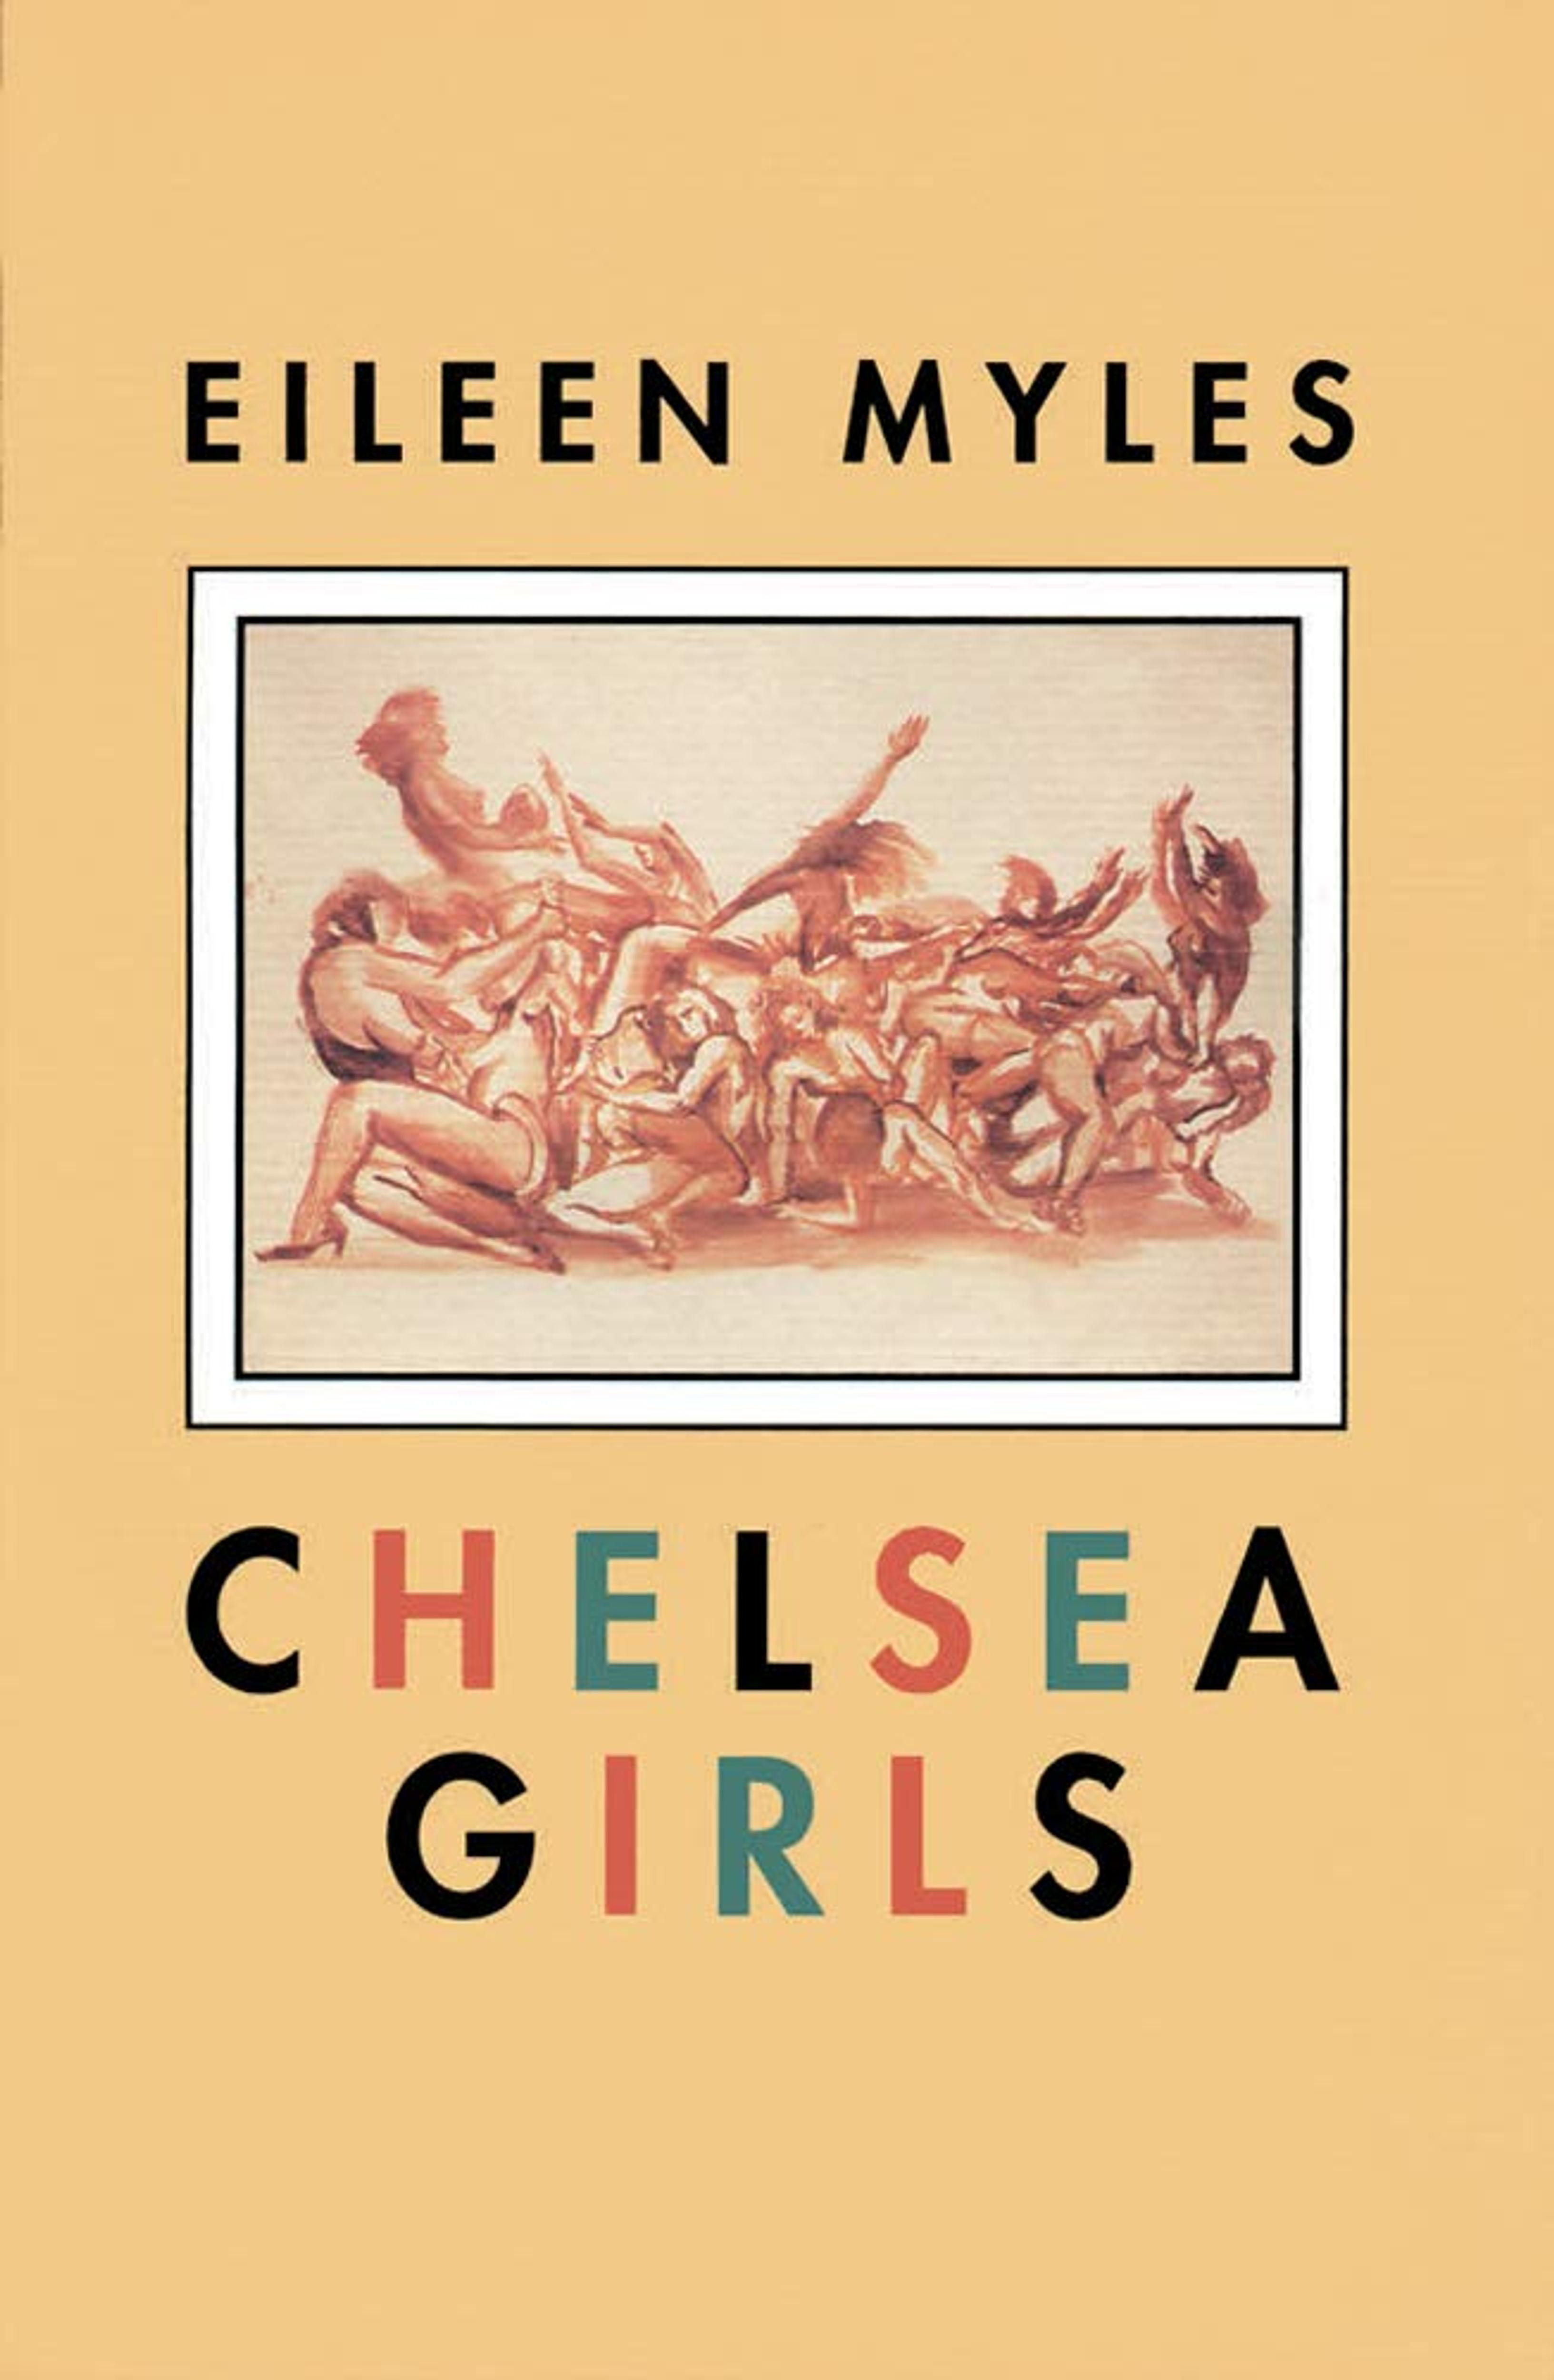 It Was Me and Not Me All the Time: A Conversation with Eileen Myles